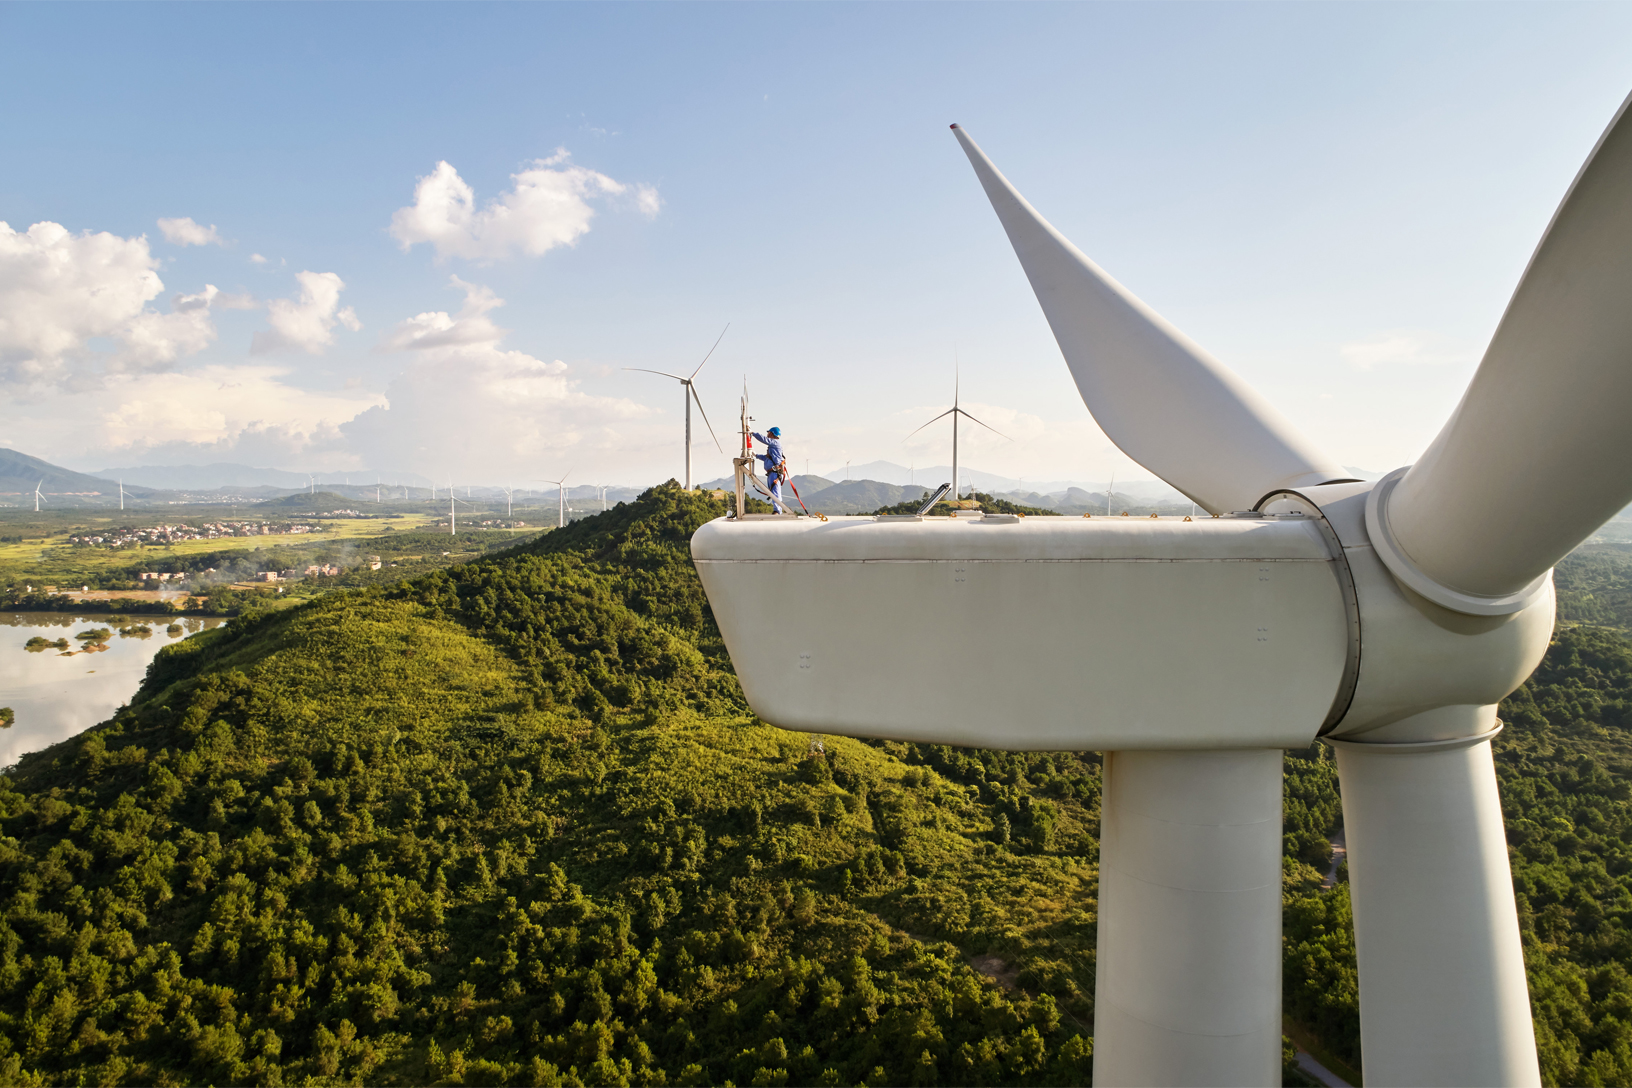 China-Clean-Energy-Fund-invests-in-wind-farms-082619_big.jpg.large_2x